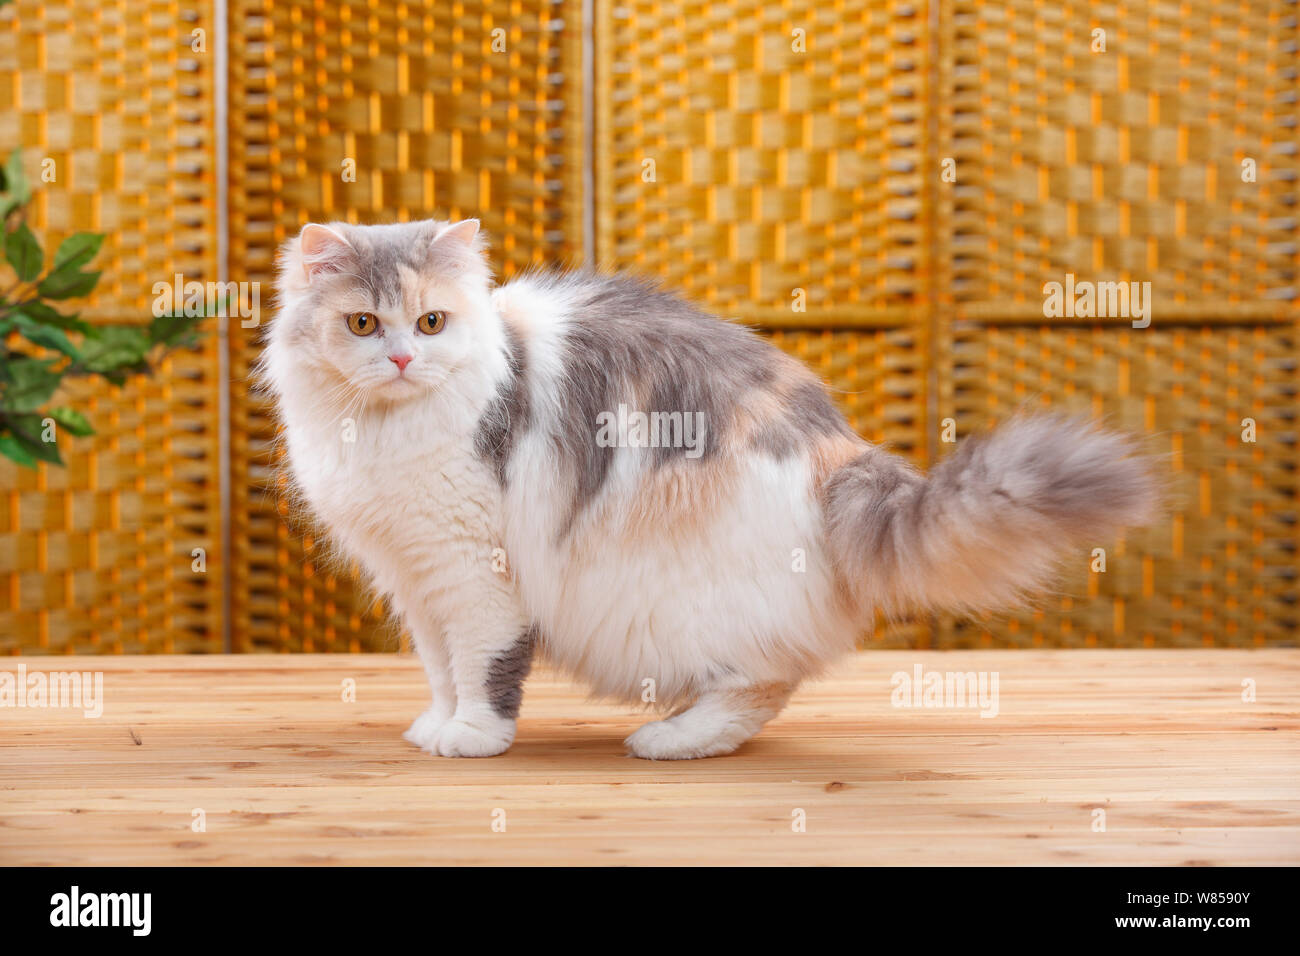 British Longhair Cat with blue-and-white coat . Banque D'Images